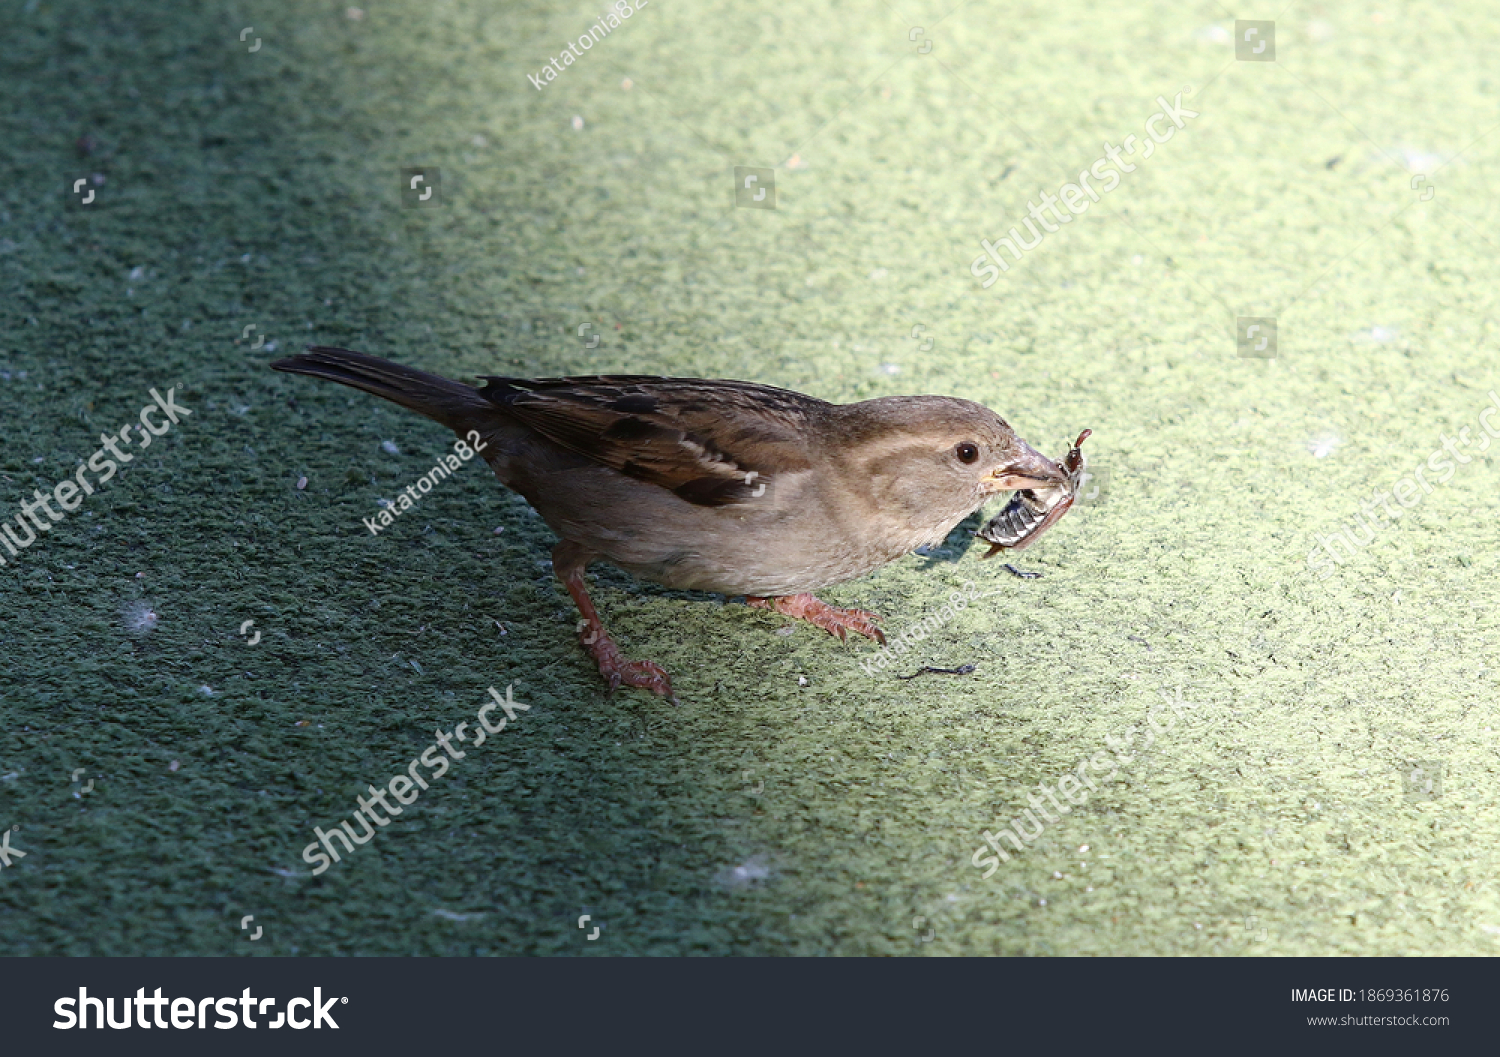 Sparrow holds a cockchafer beetle in its beak #1869361876